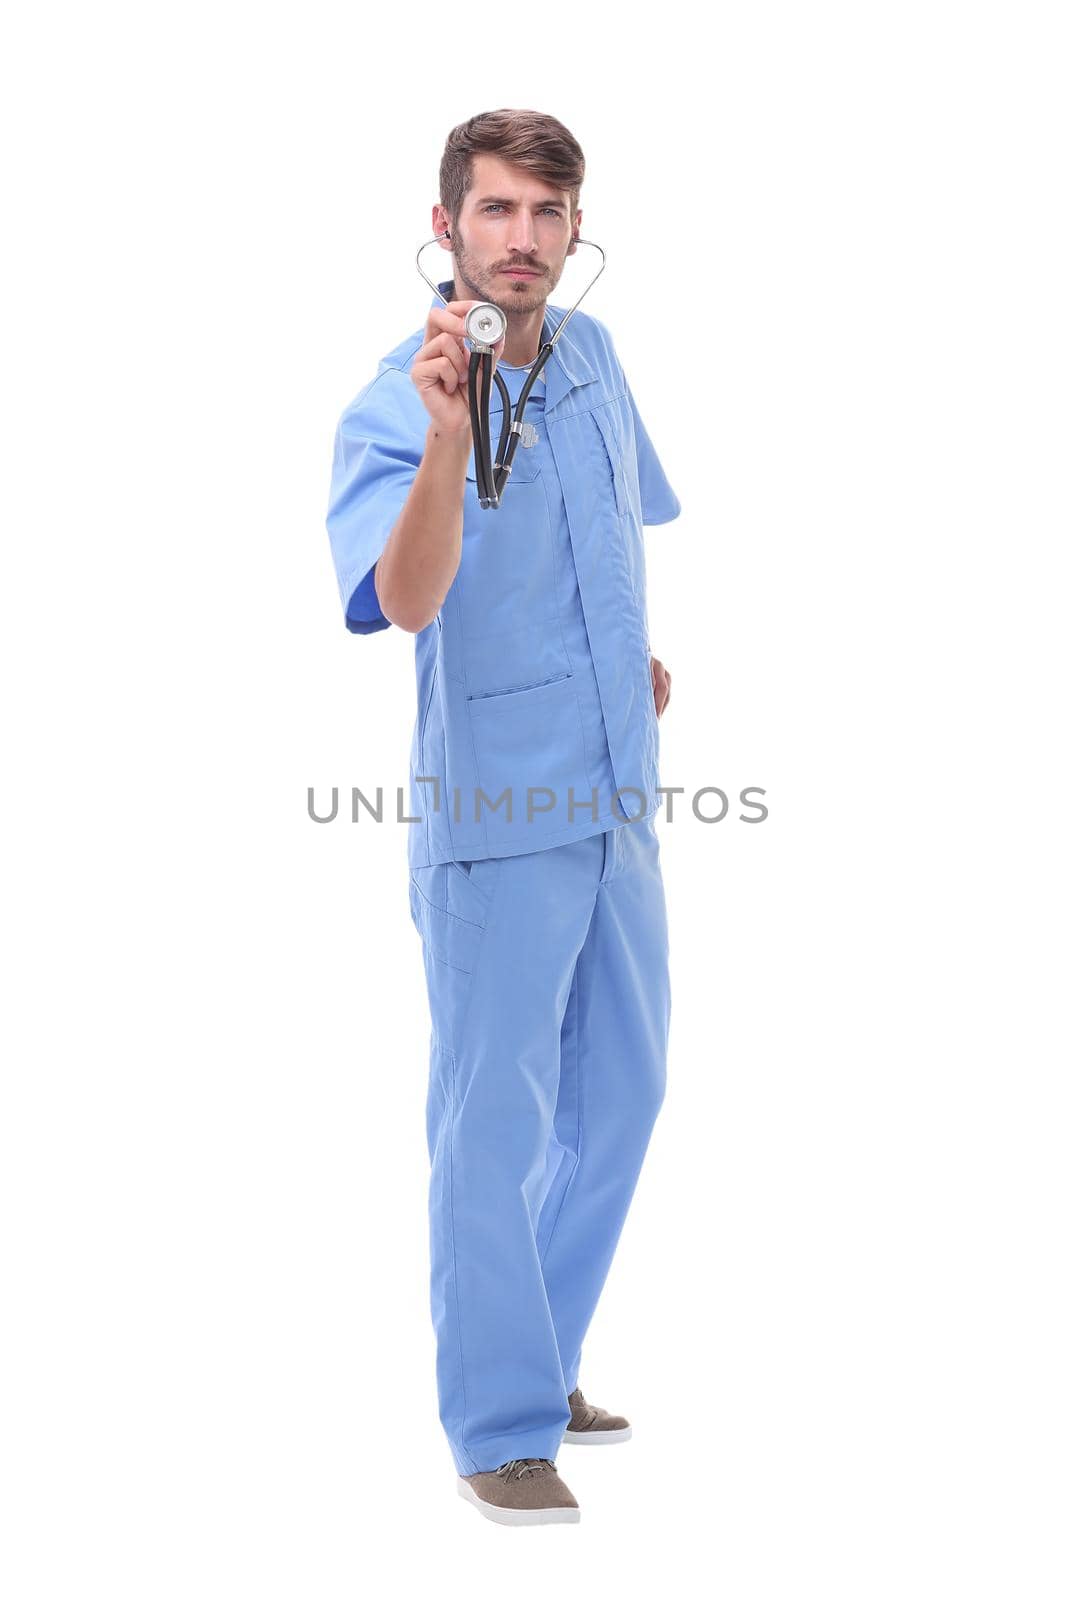 in full growth.medical doctor with stethoscope.isolated on white background